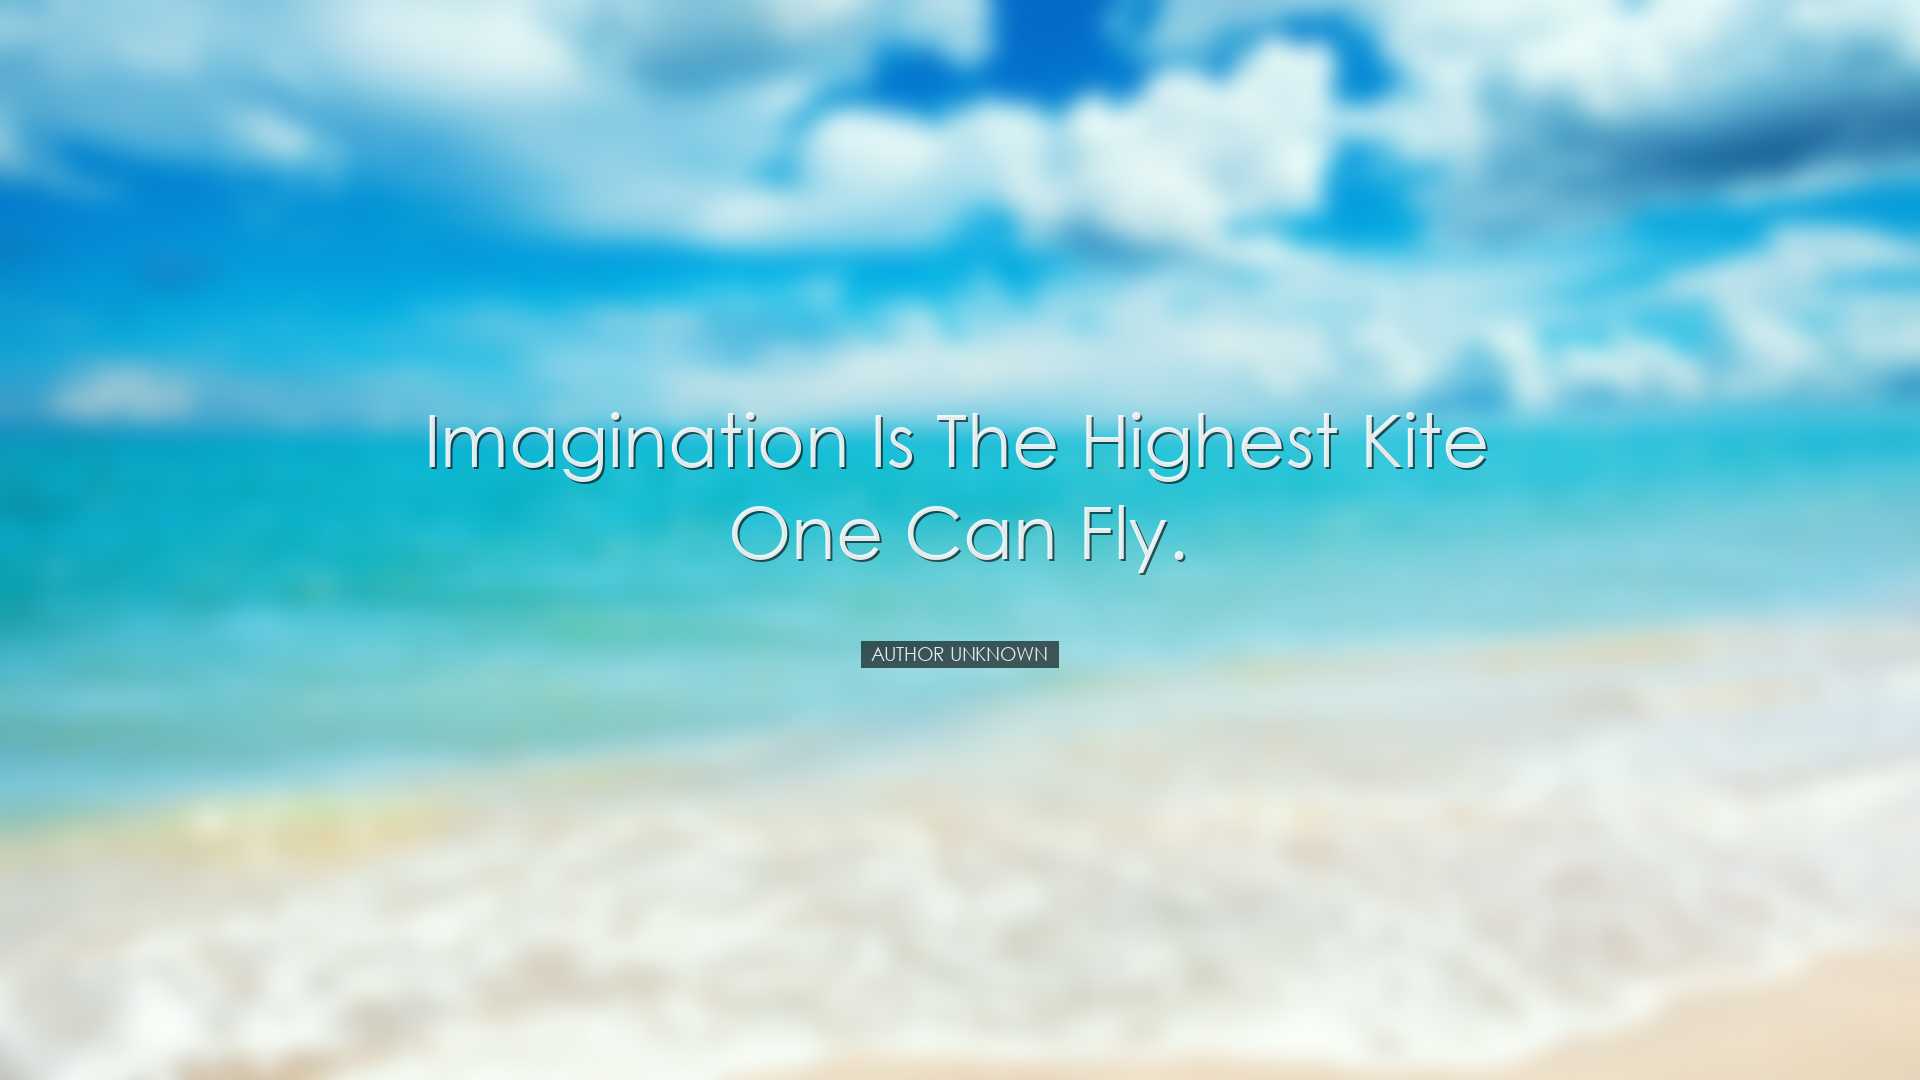 Imagination is the highest kite one can fly. - Author Unknown